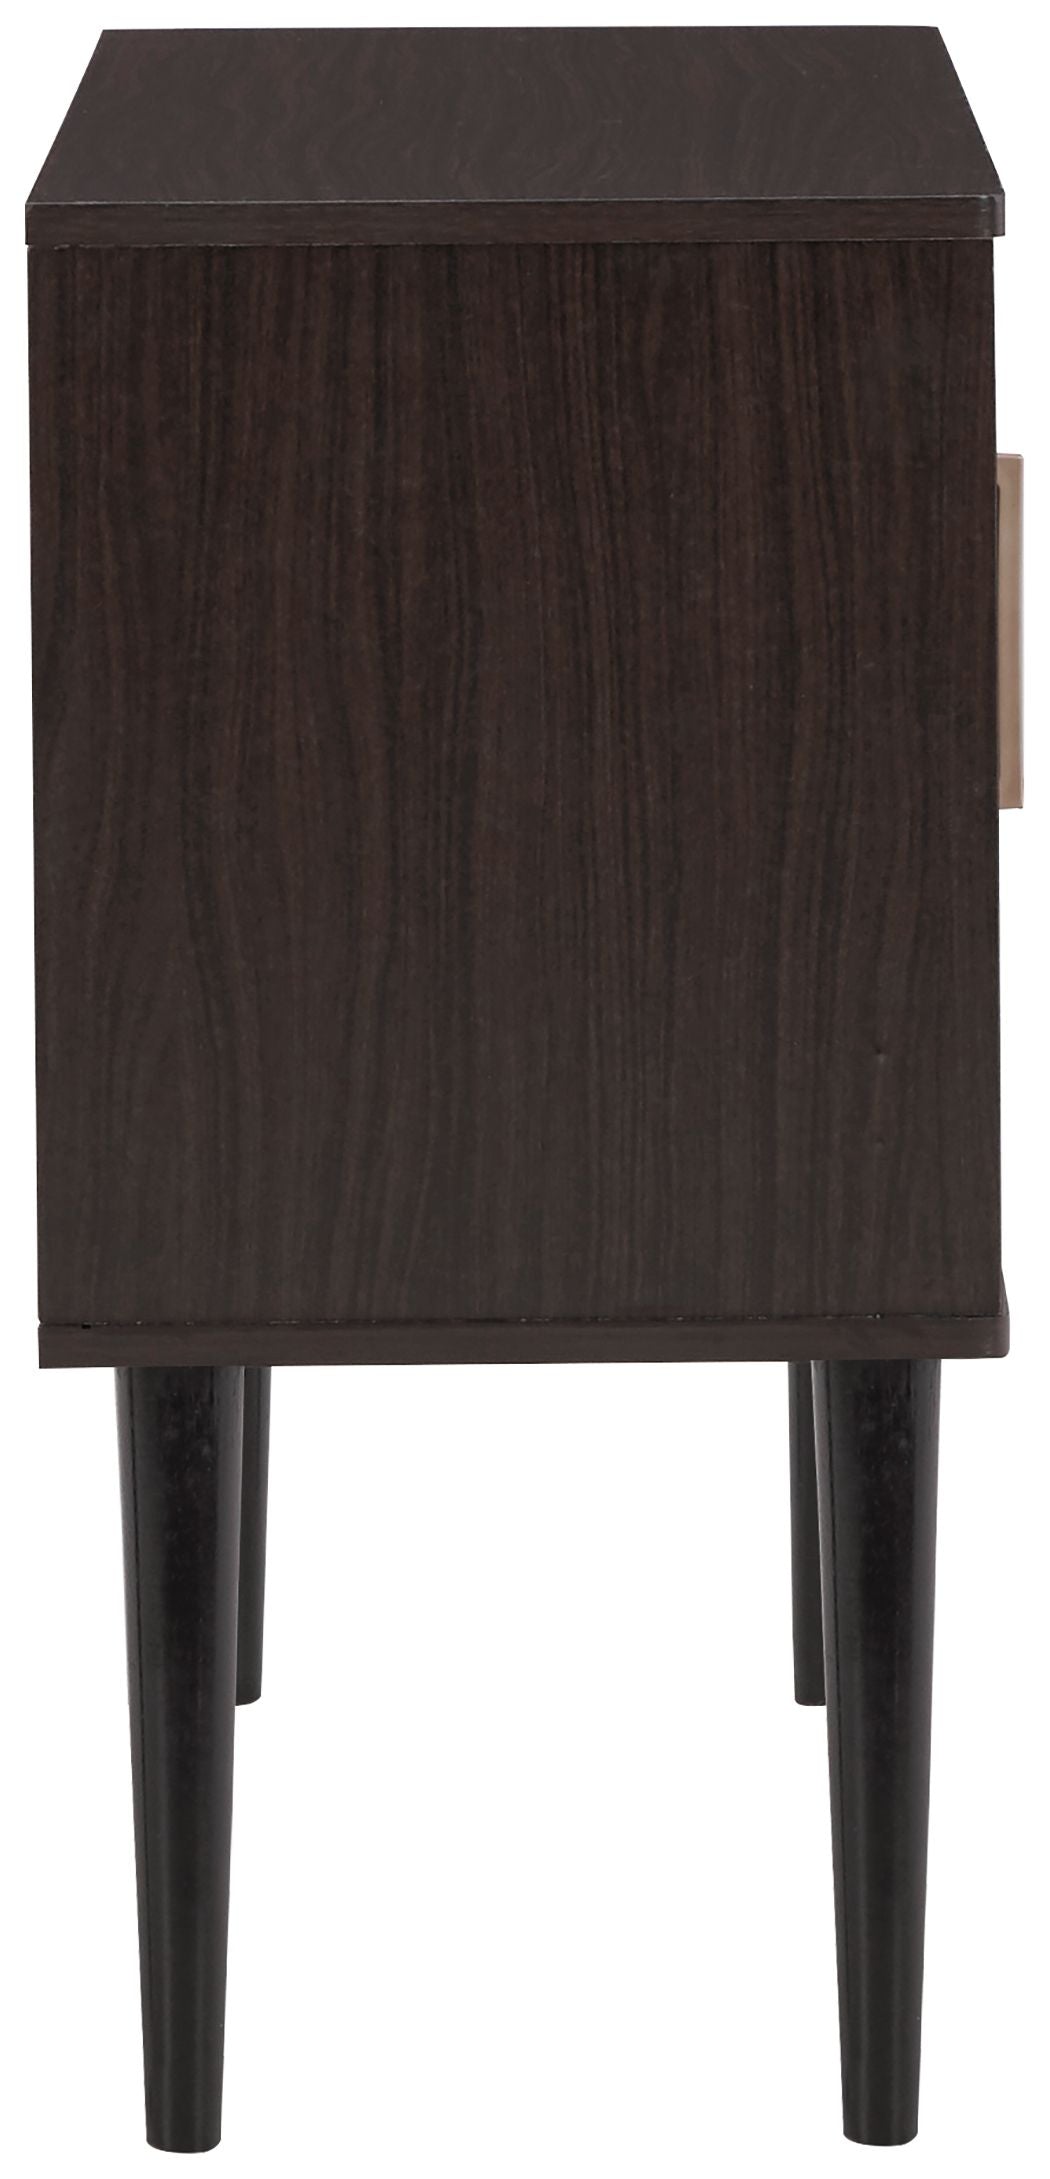 Orinfield - Accent Cabinet - Tony's Home Furnishings